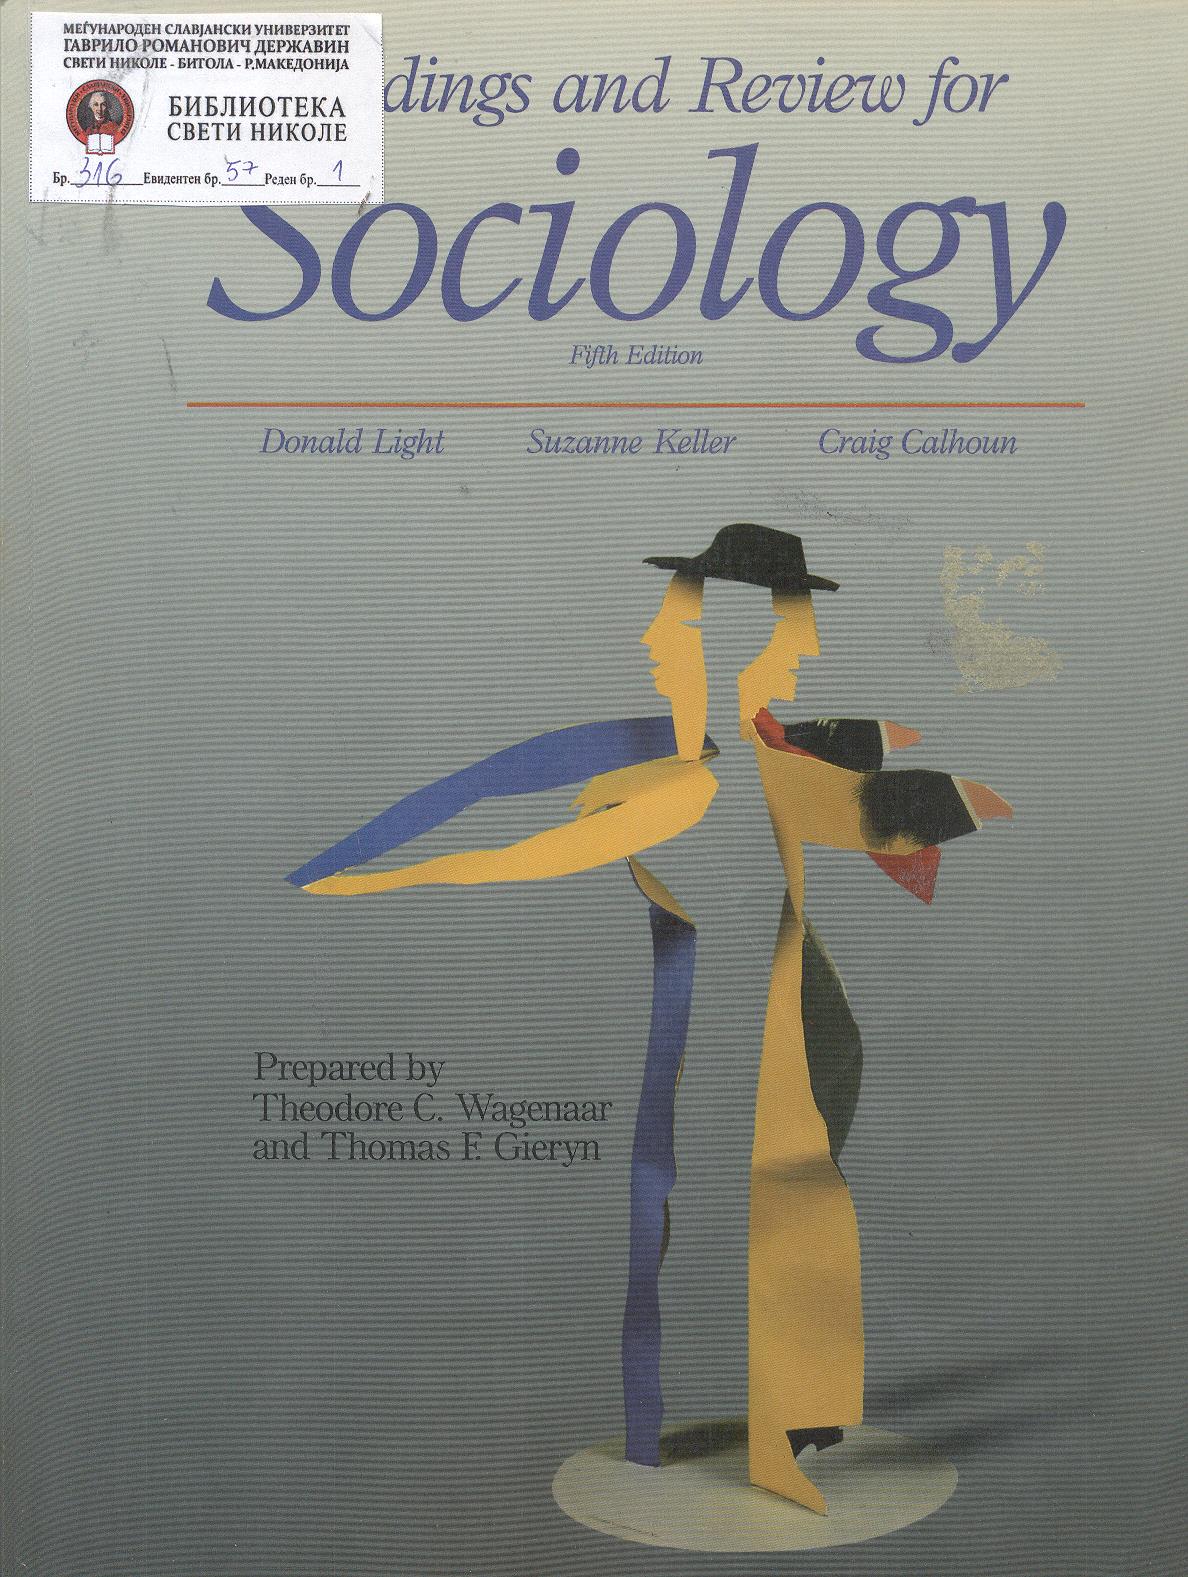 Reading and review for sociology